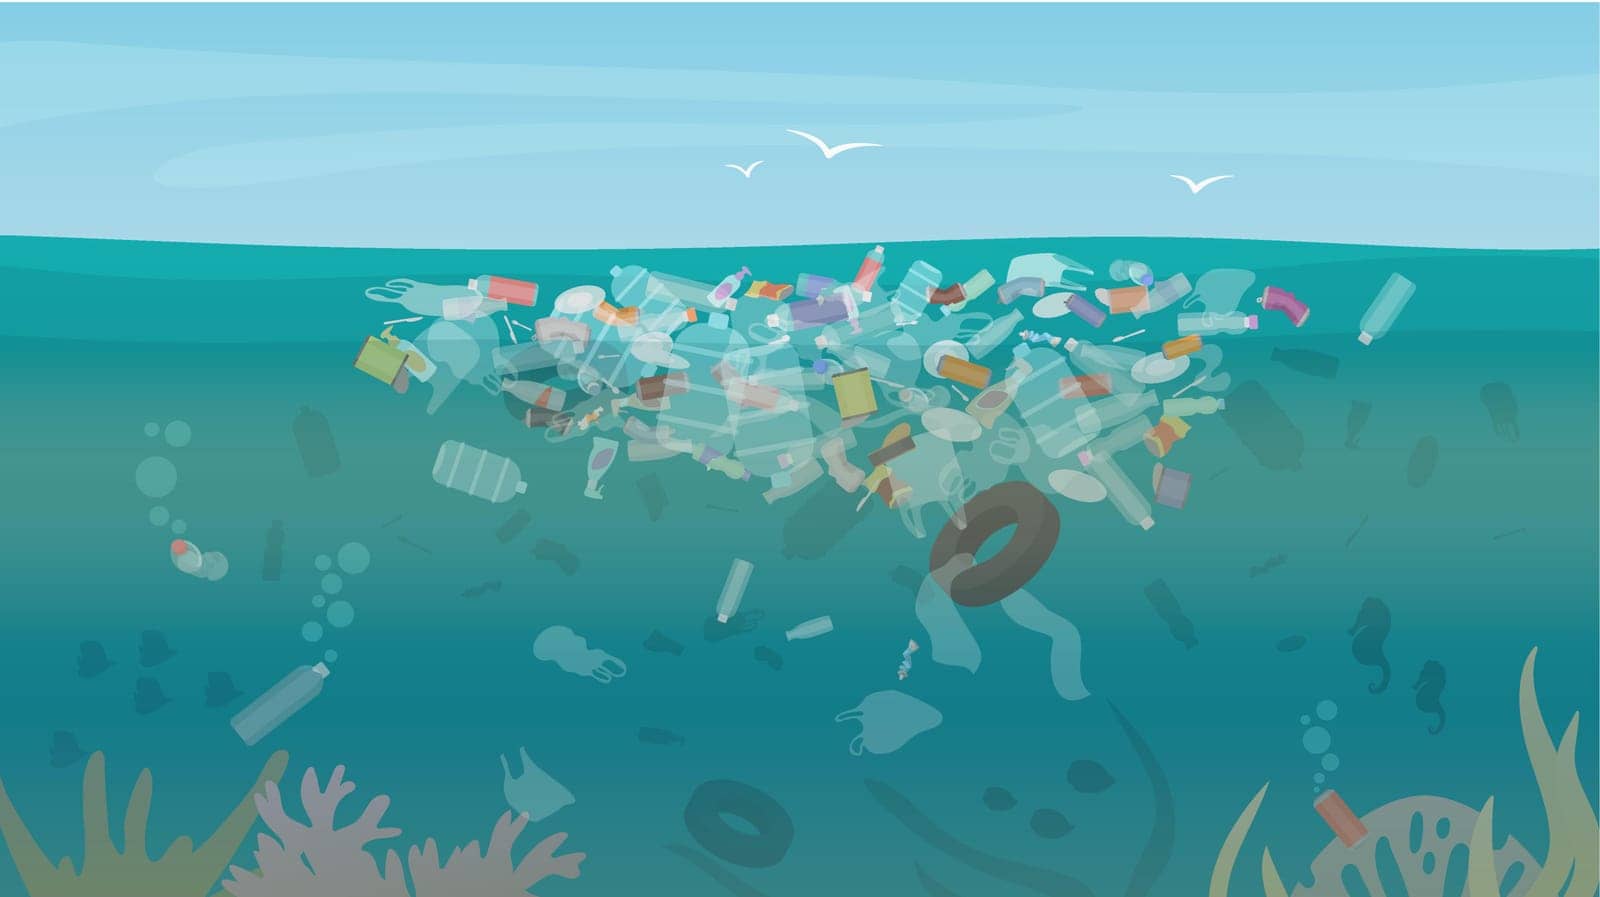 Polluted with trash and garbage underwater of ocean or sea vector illustration. Cartoon bottles, plastic bags and industry toxic waste floating in dirty water background. Environment, danger concept